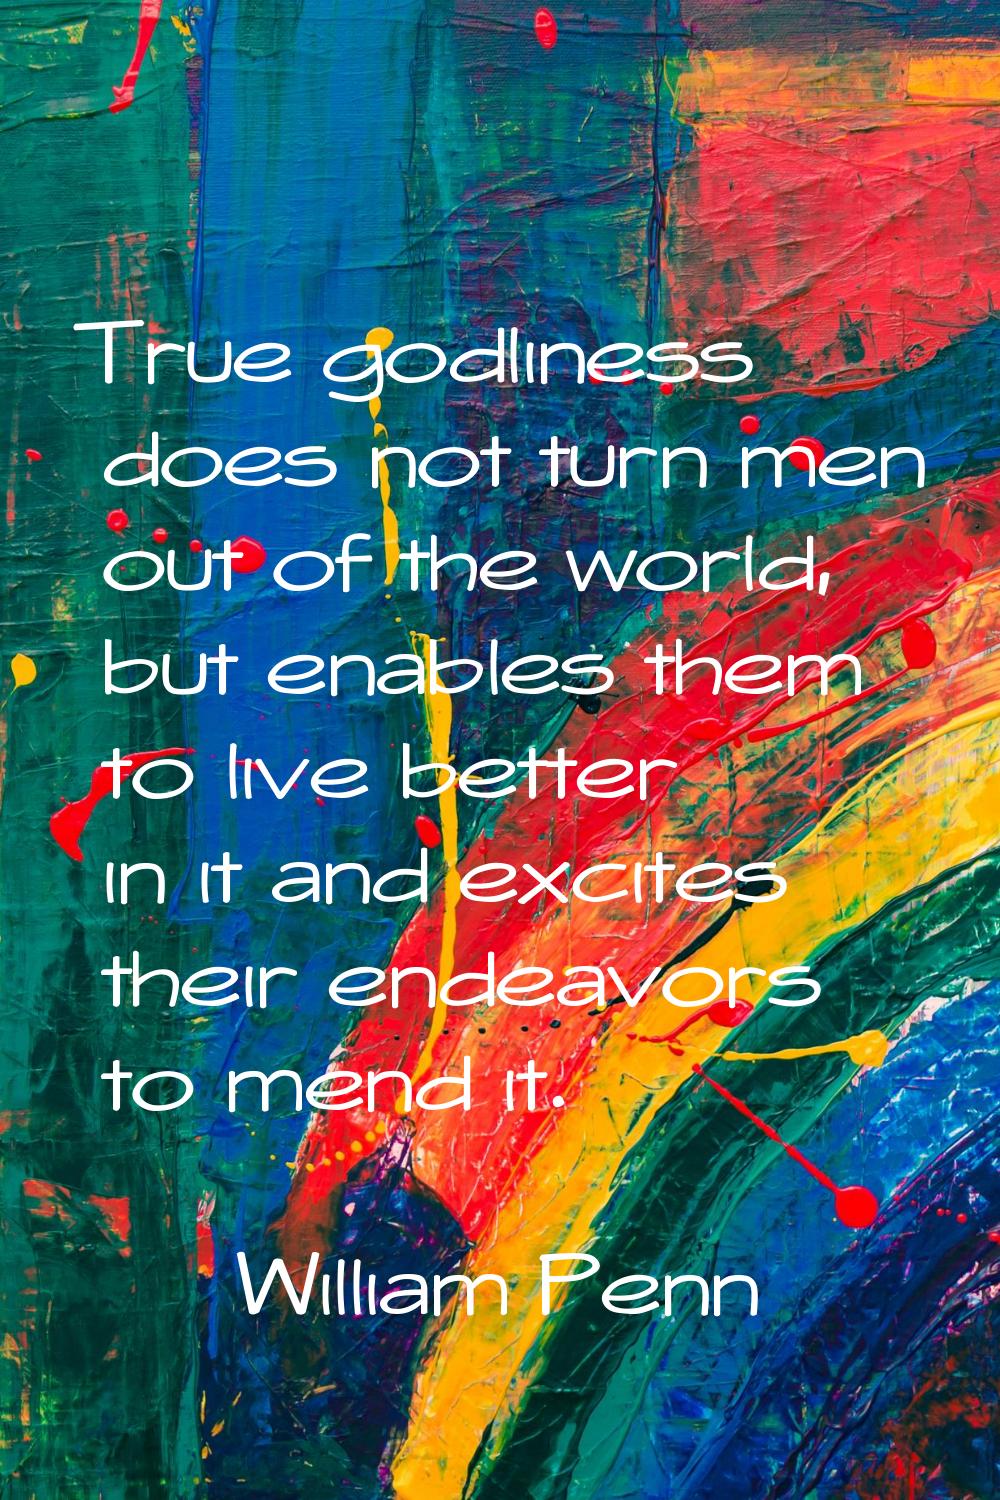 True godliness does not turn men out of the world, but enables them to live better in it and excite